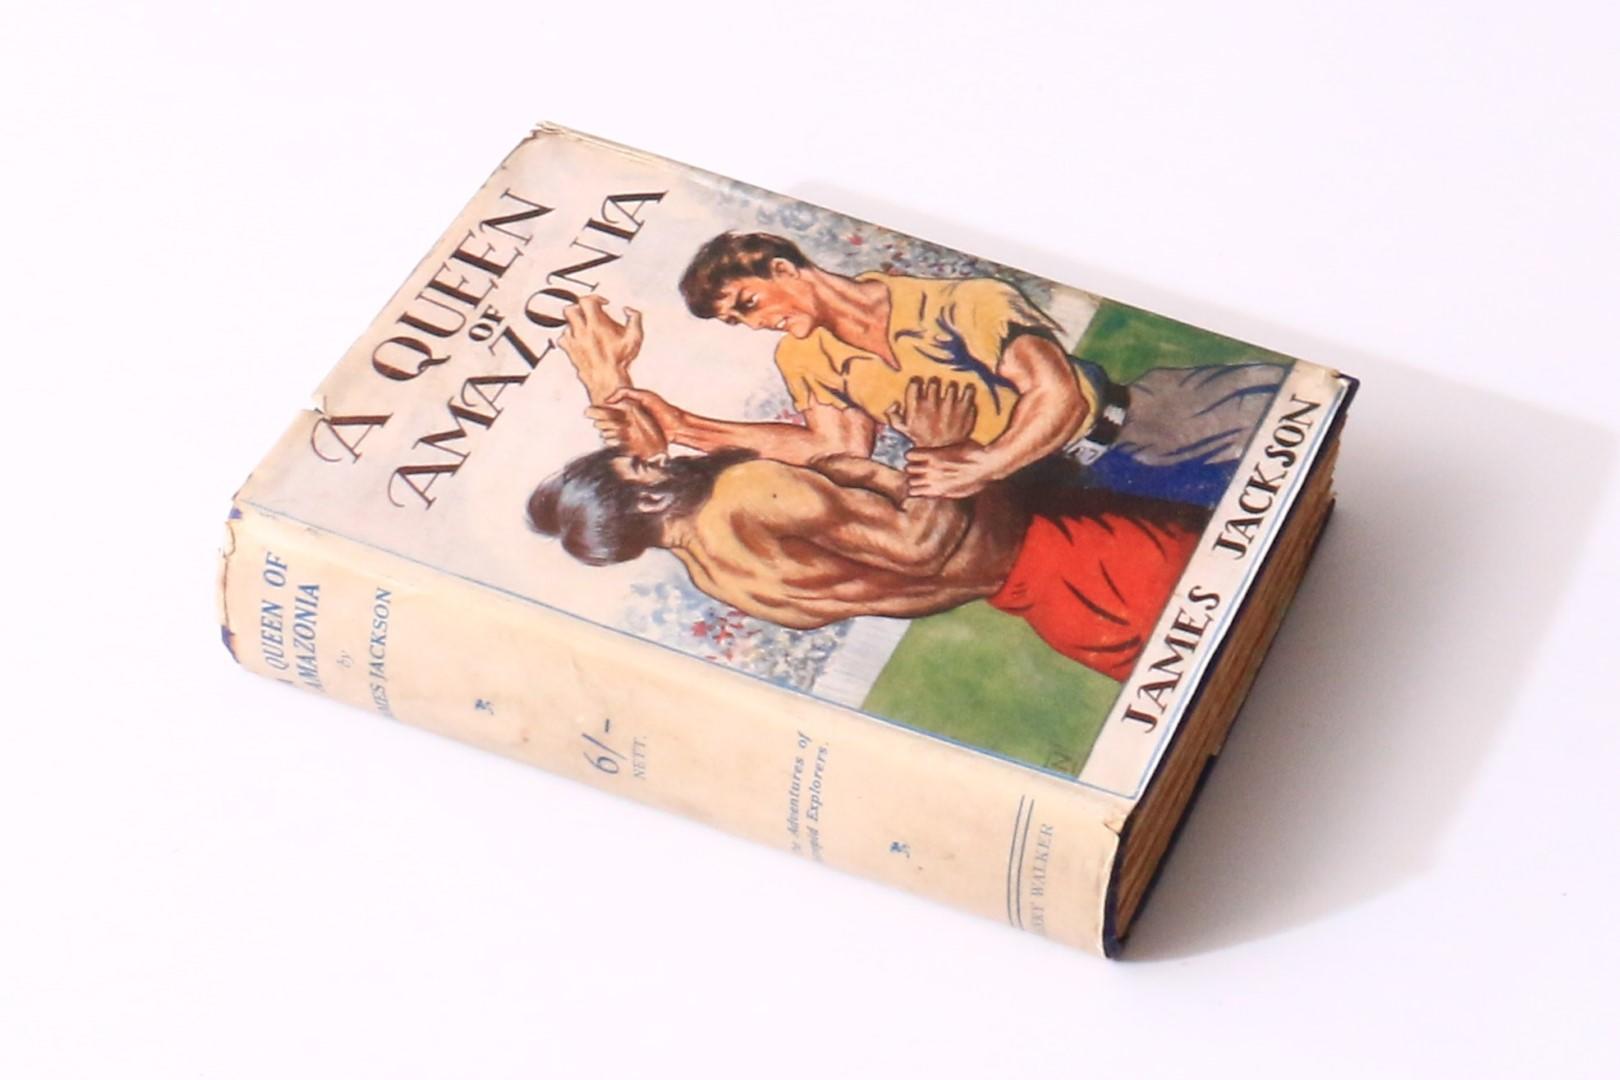 James Jackson - A Queen of Amazonia - Henry Walker, 1928, First Edition.